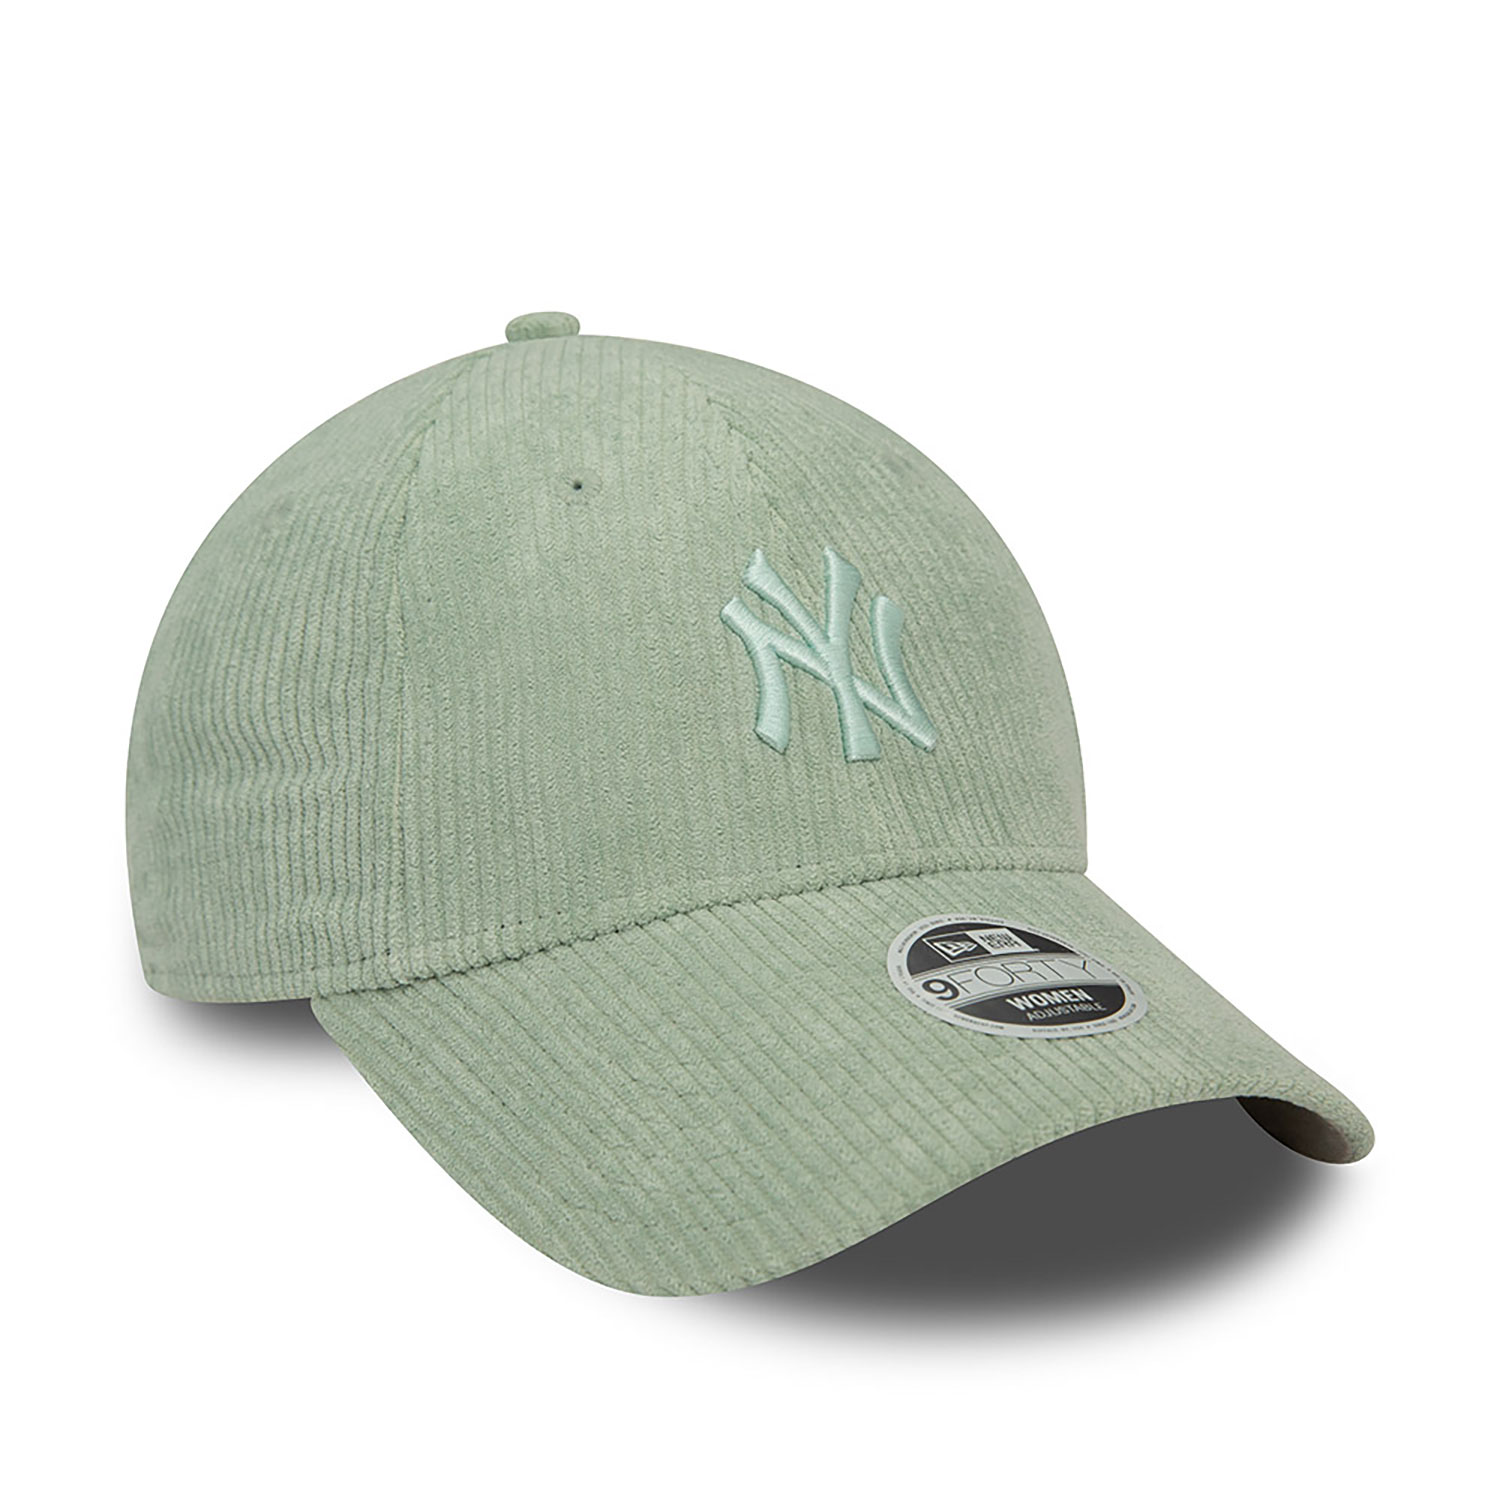 New York Yankees Womens Summer Cord Green 9FORTY Adjustable Cap